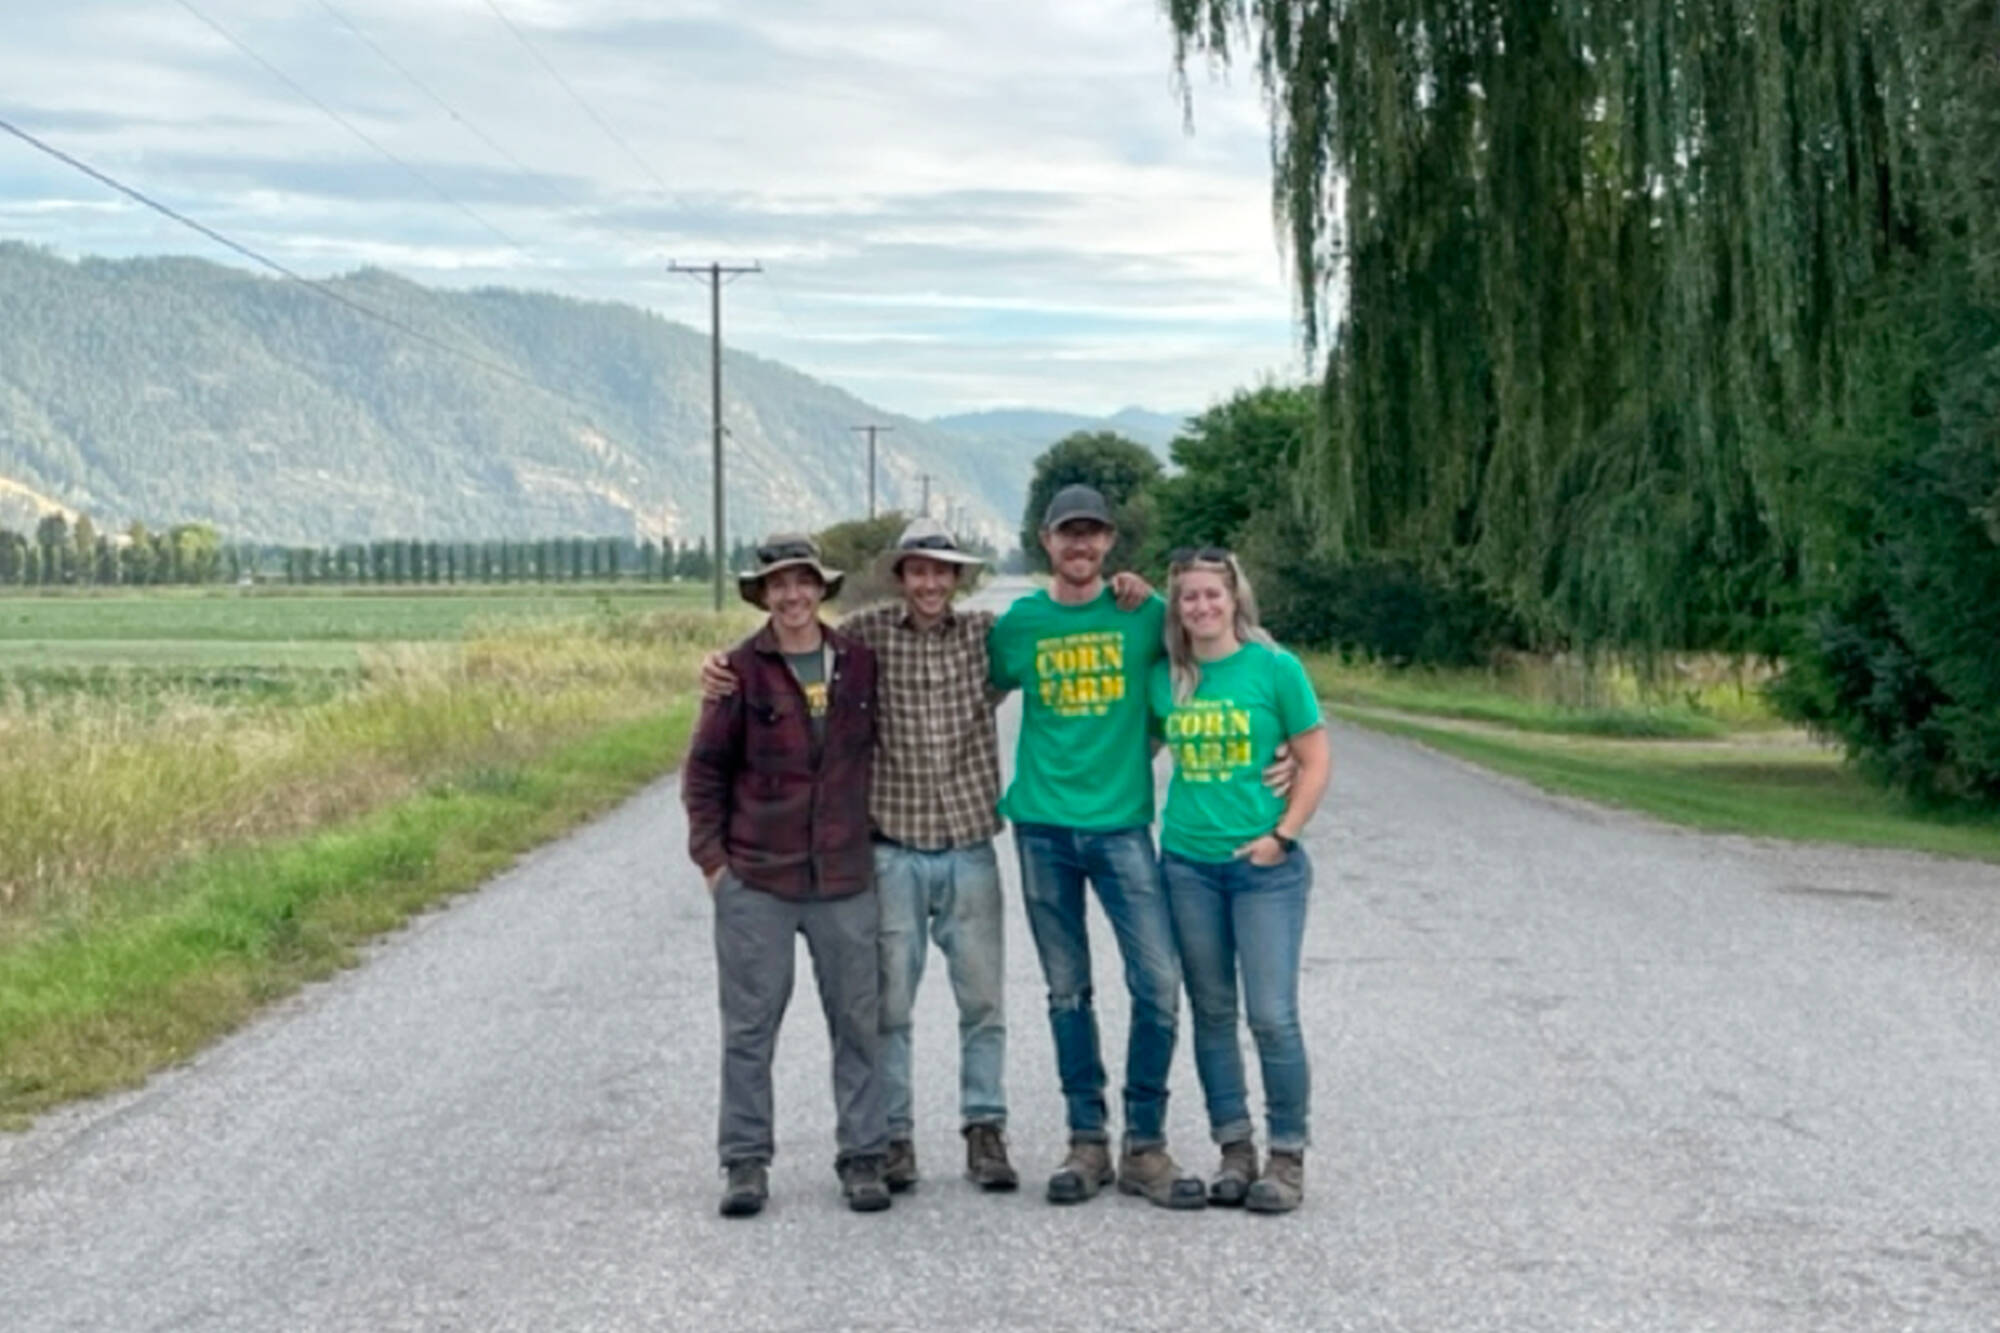 Young agrarians Lewis and Vincent Burkholder operate the Burkholder Brothers Corn Farm, while Jordan Wales and Ashley Campbell the new faces behind Pete Murray’s Corn Farm.(Contributed)